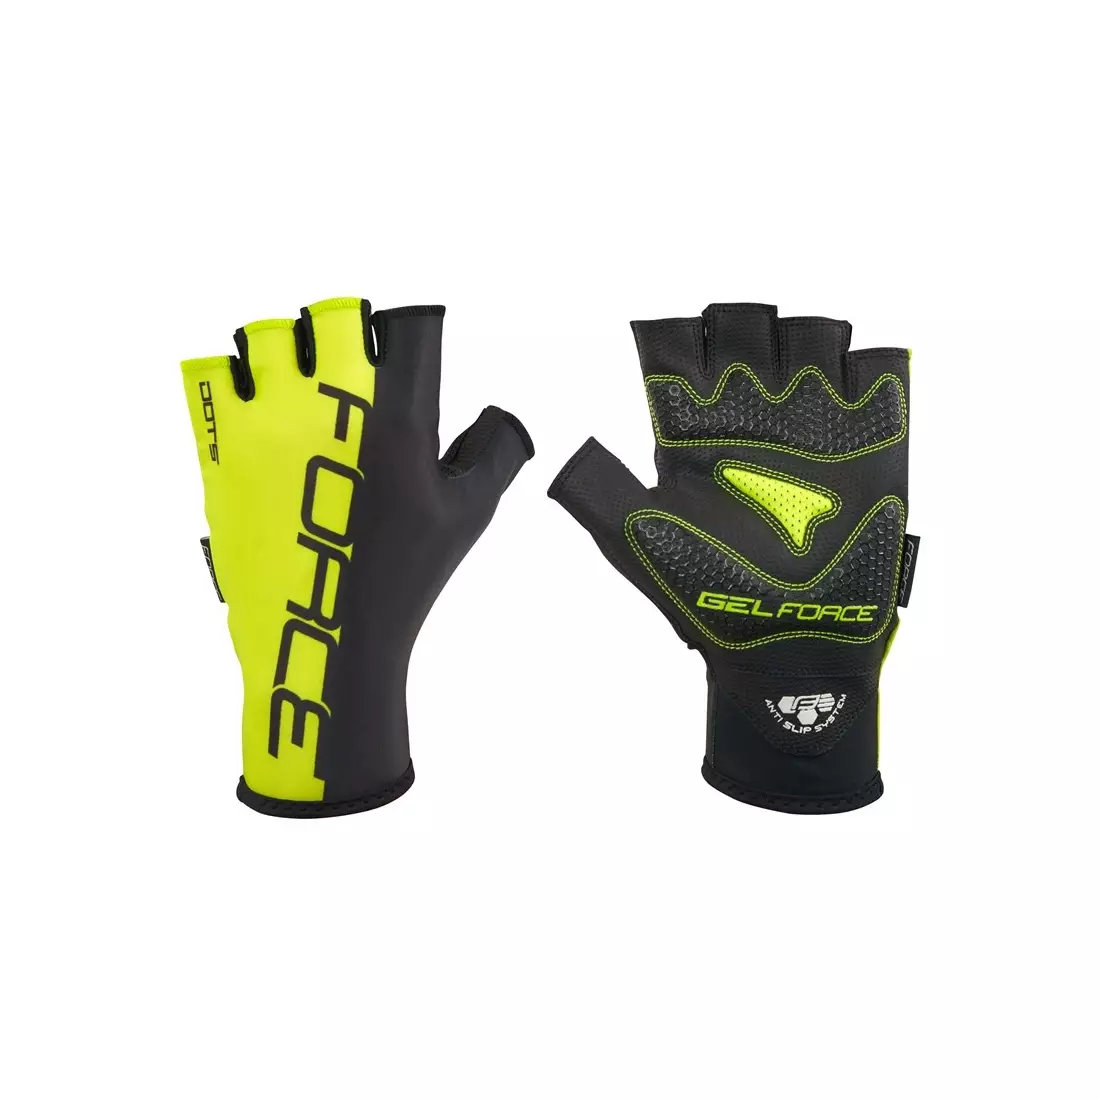 FORCE DOTS fluoro cycling gloves 905248